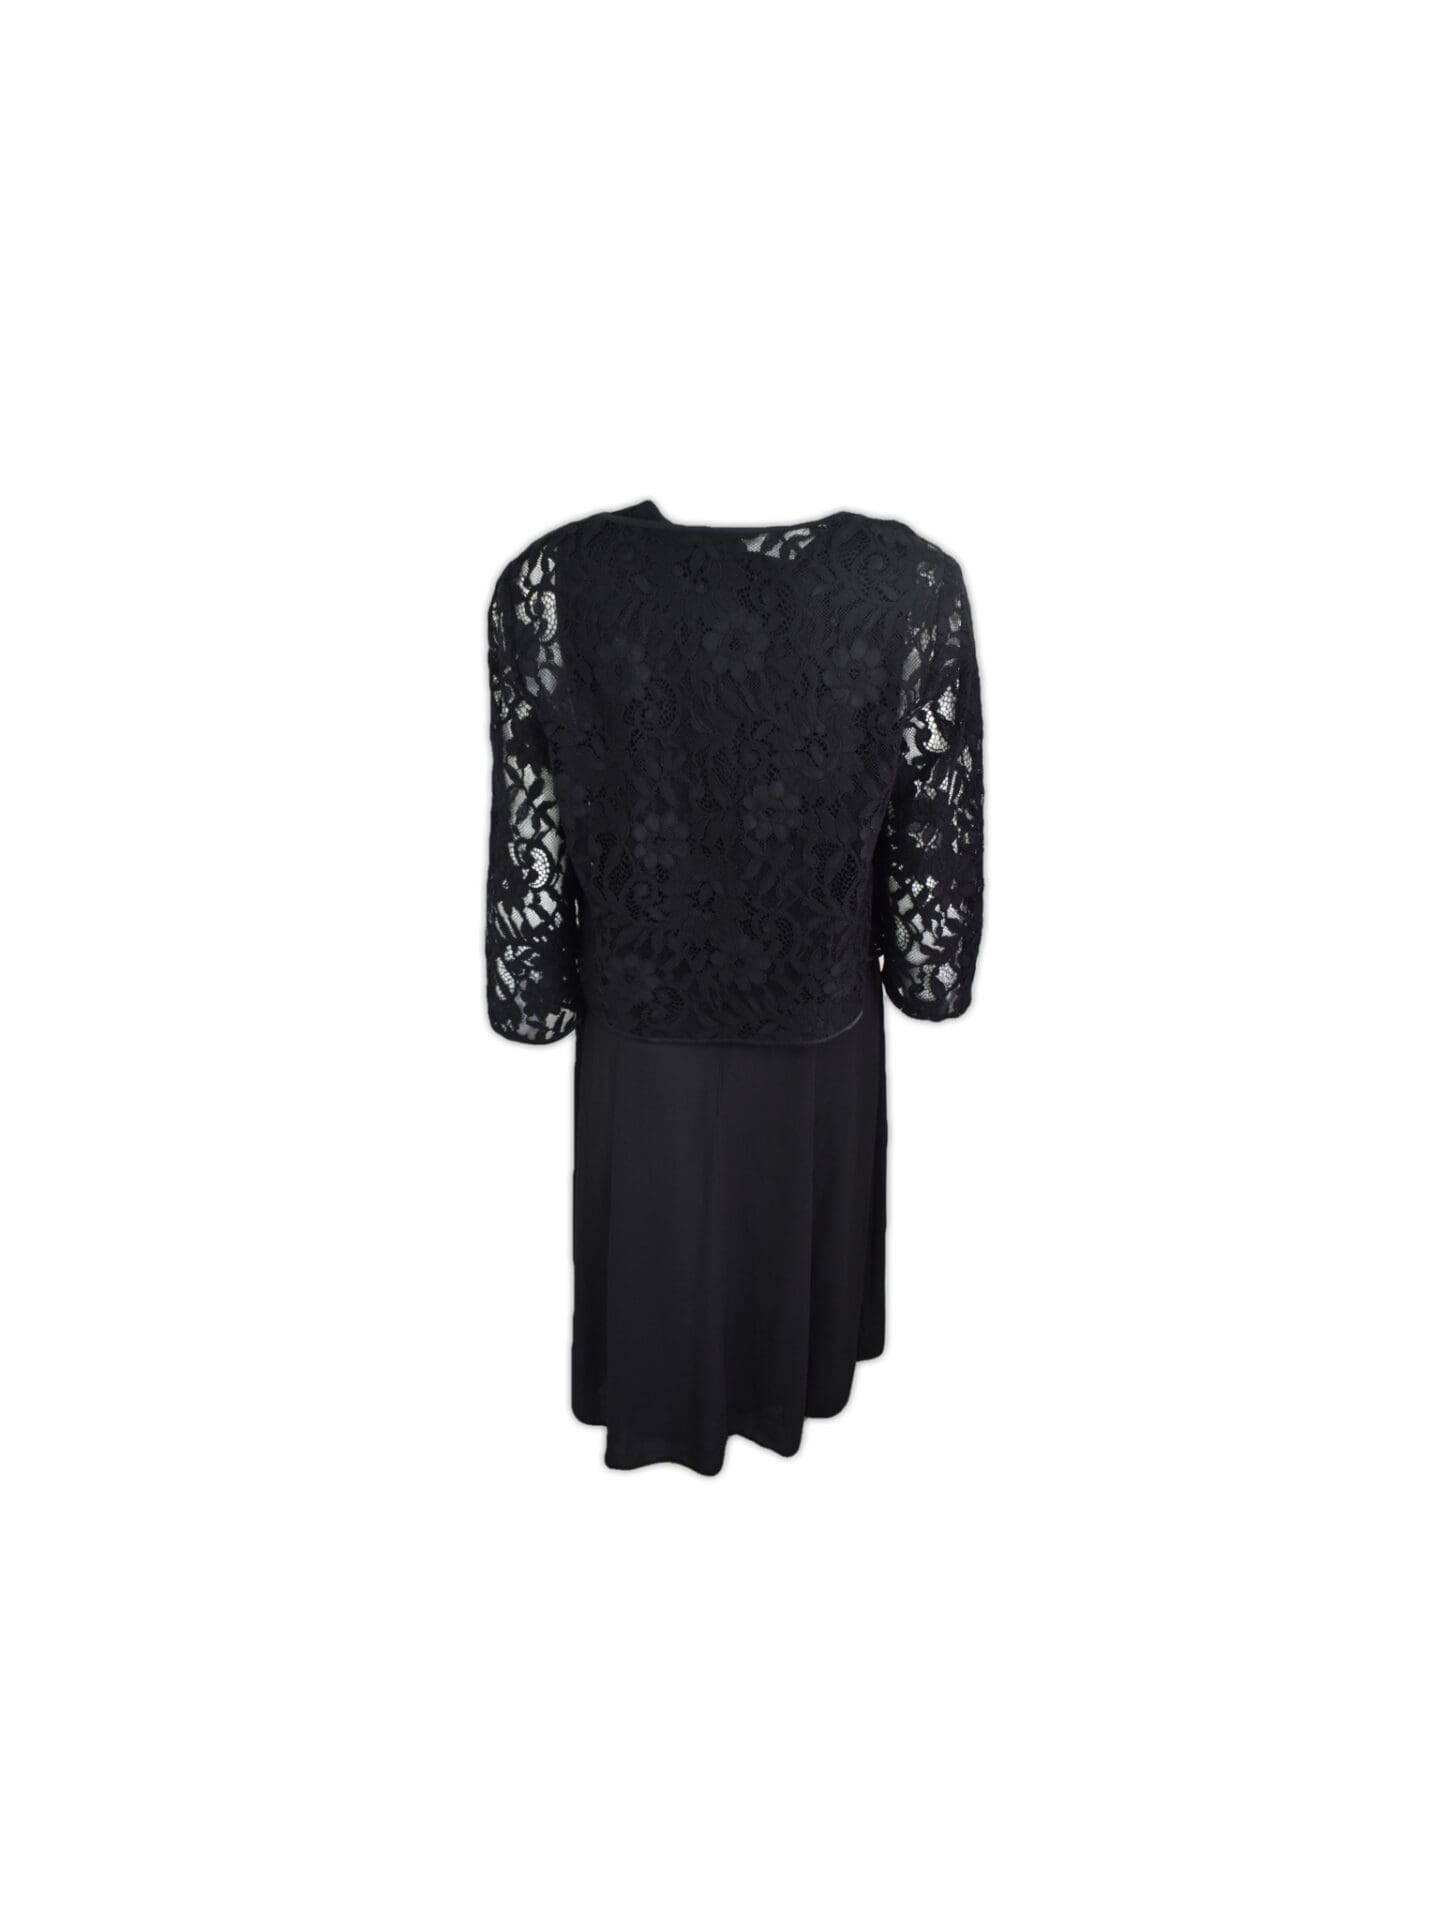 Black lace Beautiful dress with lace bodice and full skirt paired with a matching lace light weight jacket.